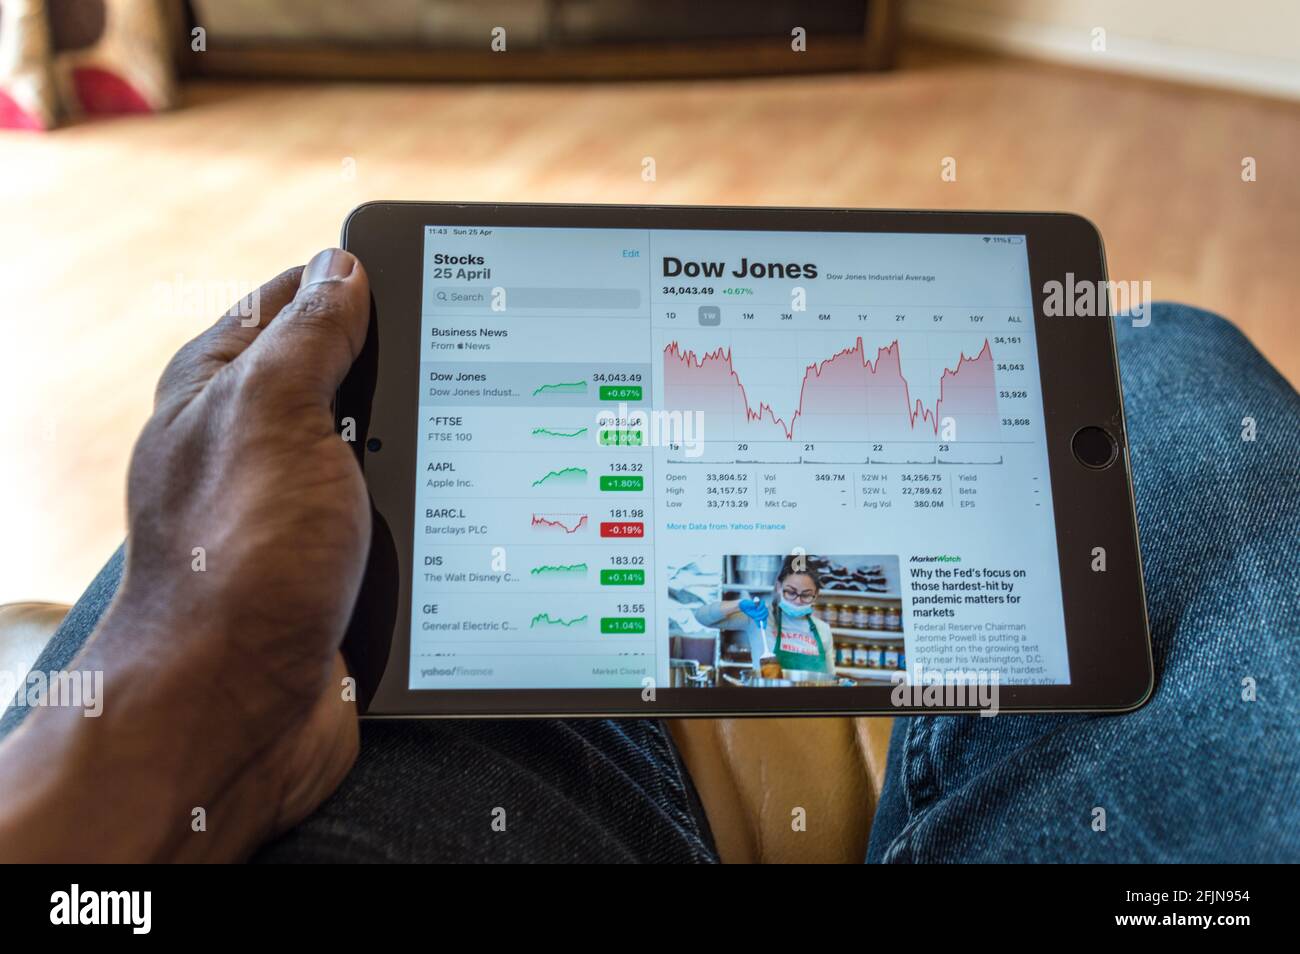 Adult male age 35 seated on sofa and checking Stock market prices on ipad Stock Photo